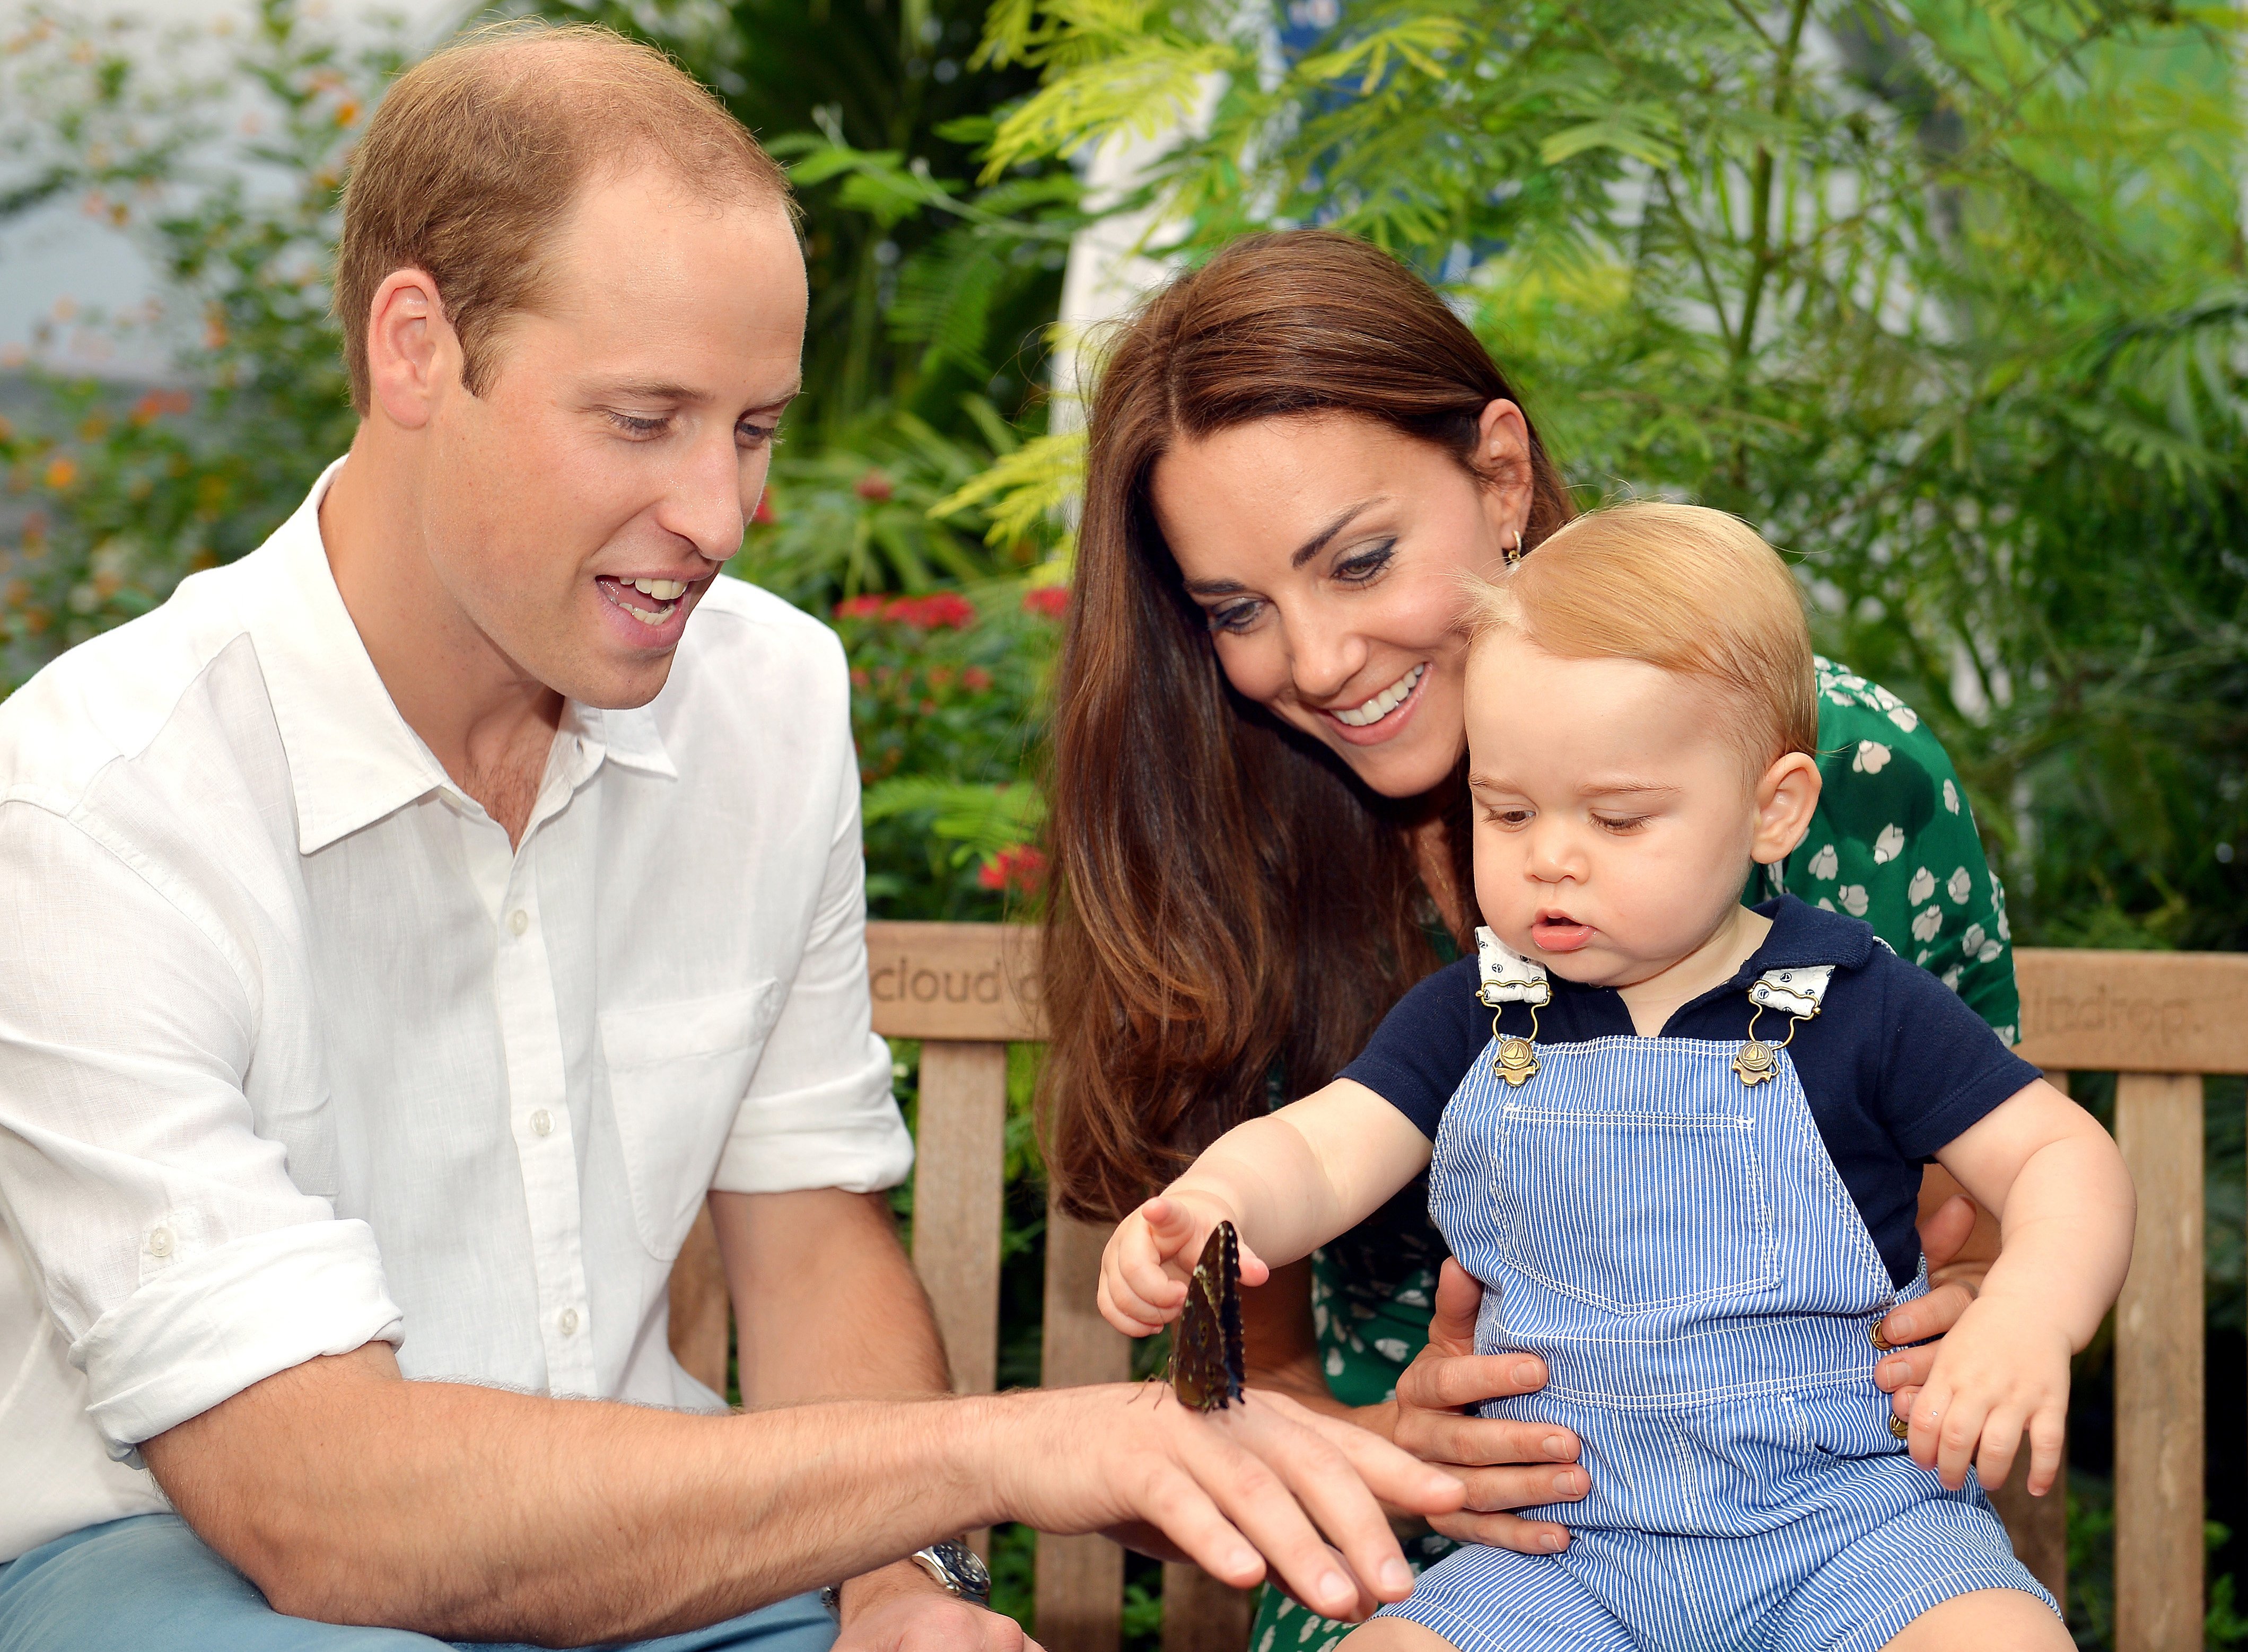 Catherine, Duchess of Cambridge holds Prince George as he points to a butterfly on Prince William, Duke of Cambridge's hand as they visit the Sensational Butterflies exhibition at the Natural History Museum on July 2, 2014 in London, England. (John Stillwell—WPA/Getty Images)